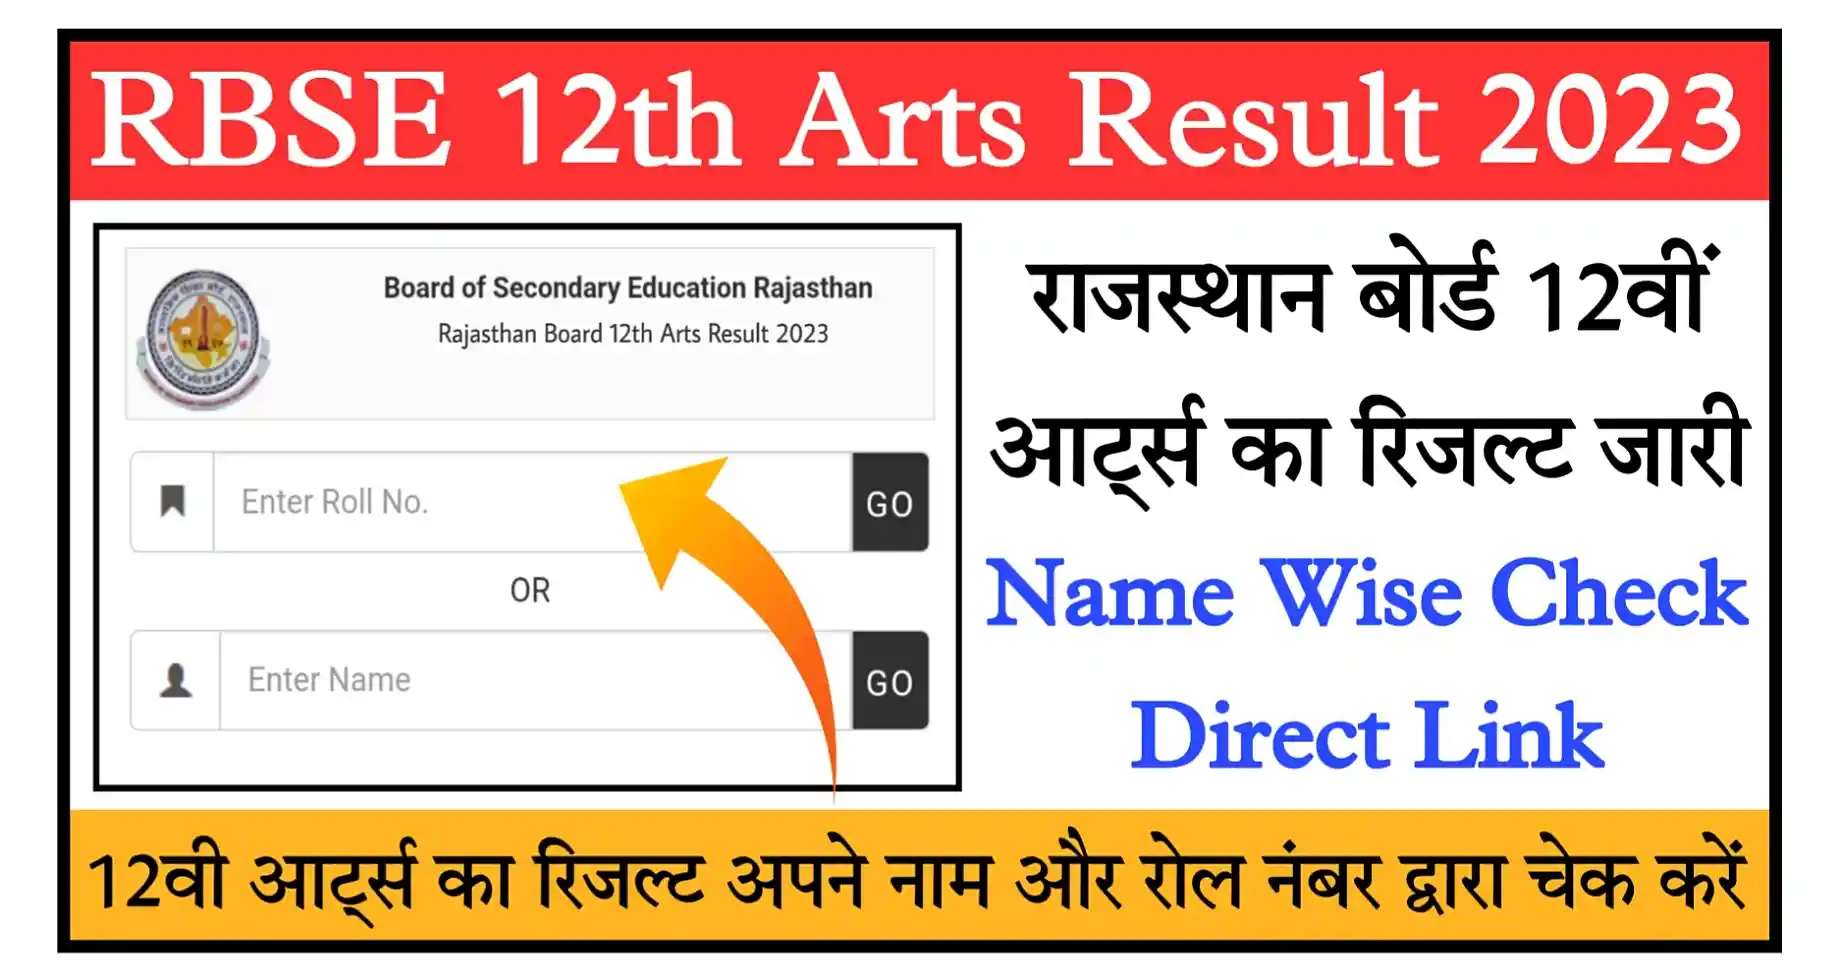 RBSE 12th Result 2023 Arts Direct Link Name Wise Check @rajeduboard.rajasthan.gov.in